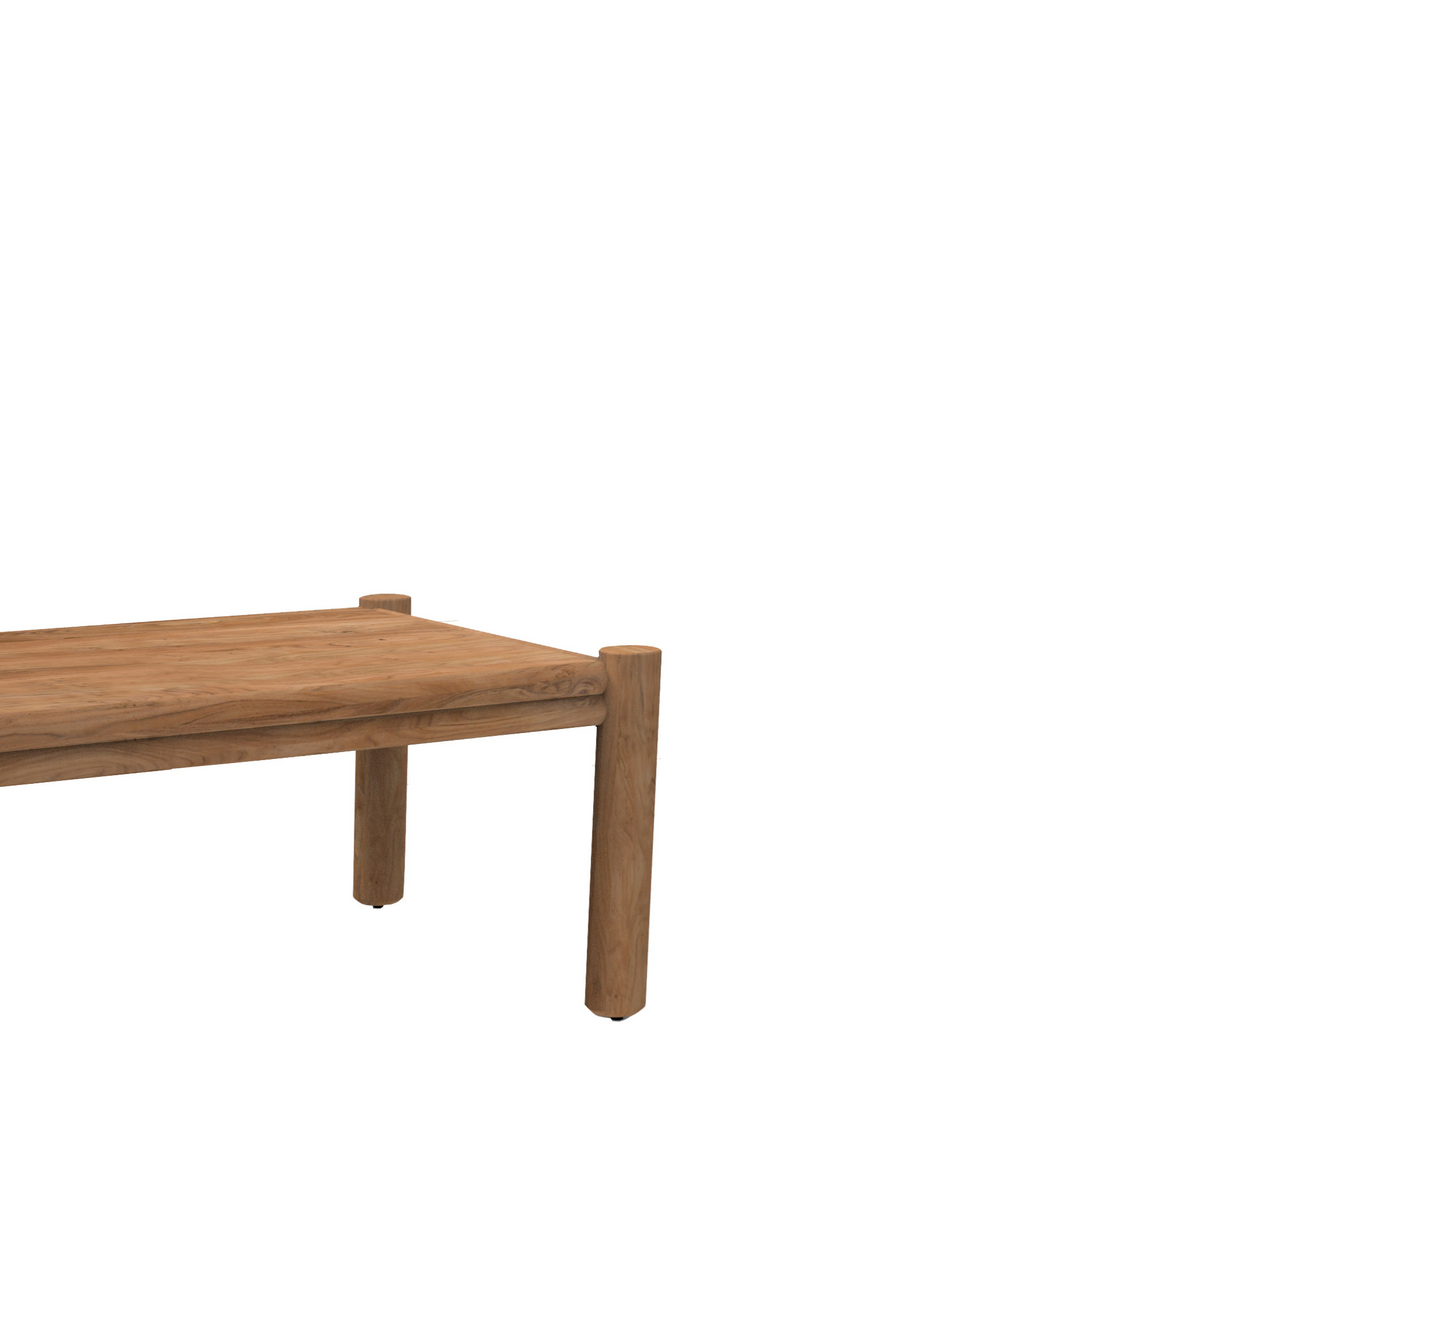 Mile Wooden Centre Table